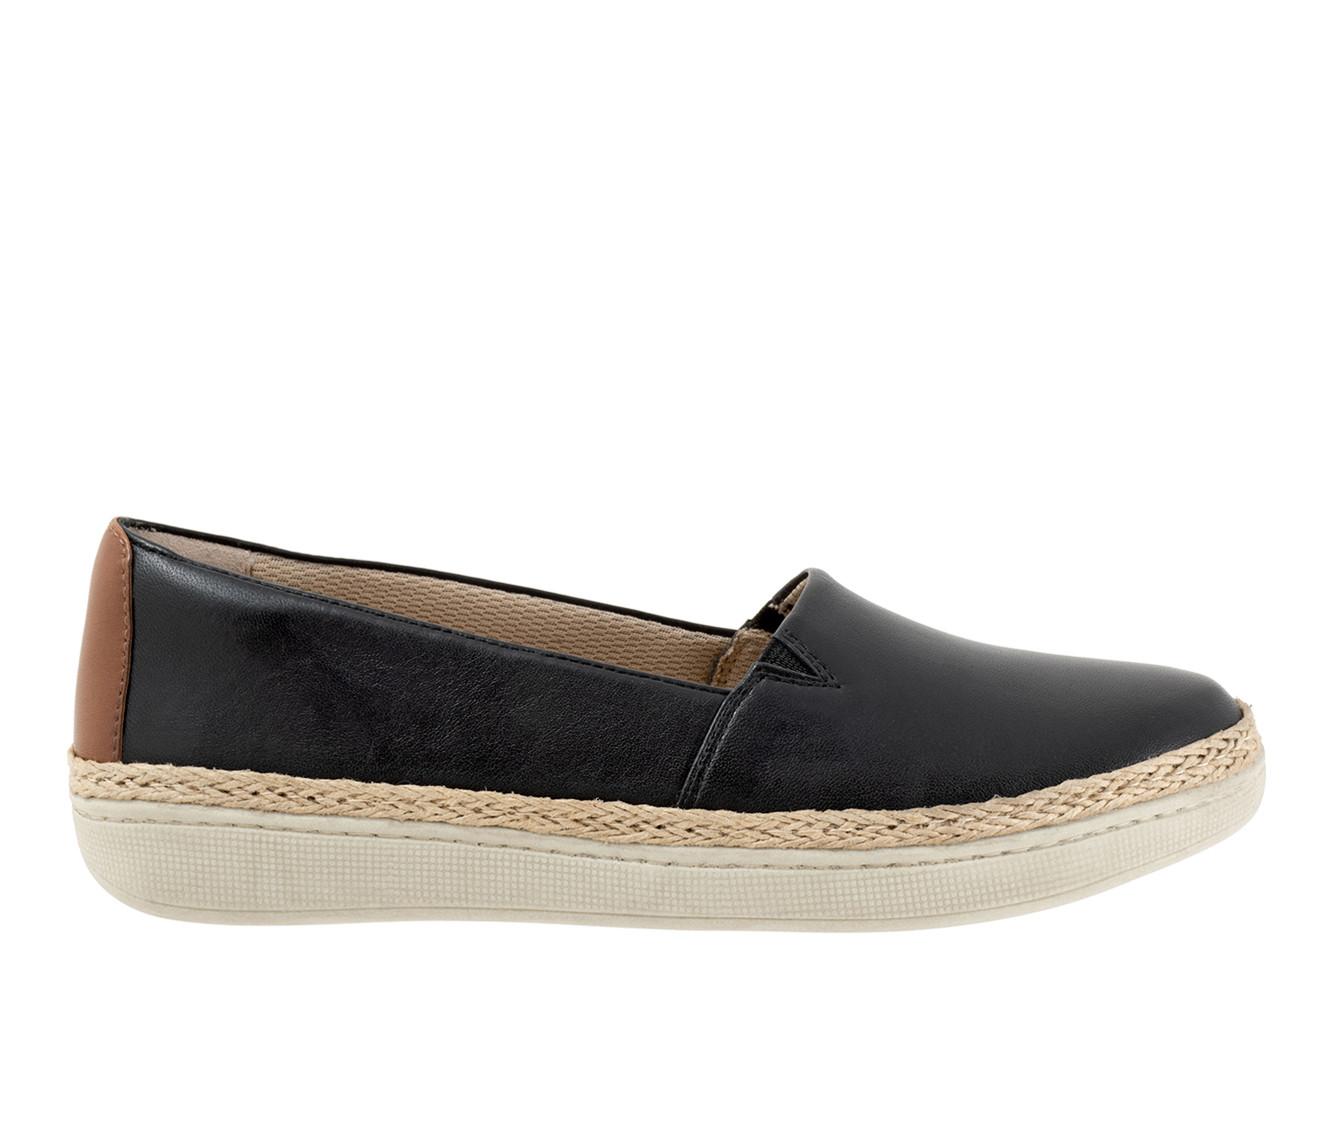 Women's Trotters Accent Slip-On Shoes